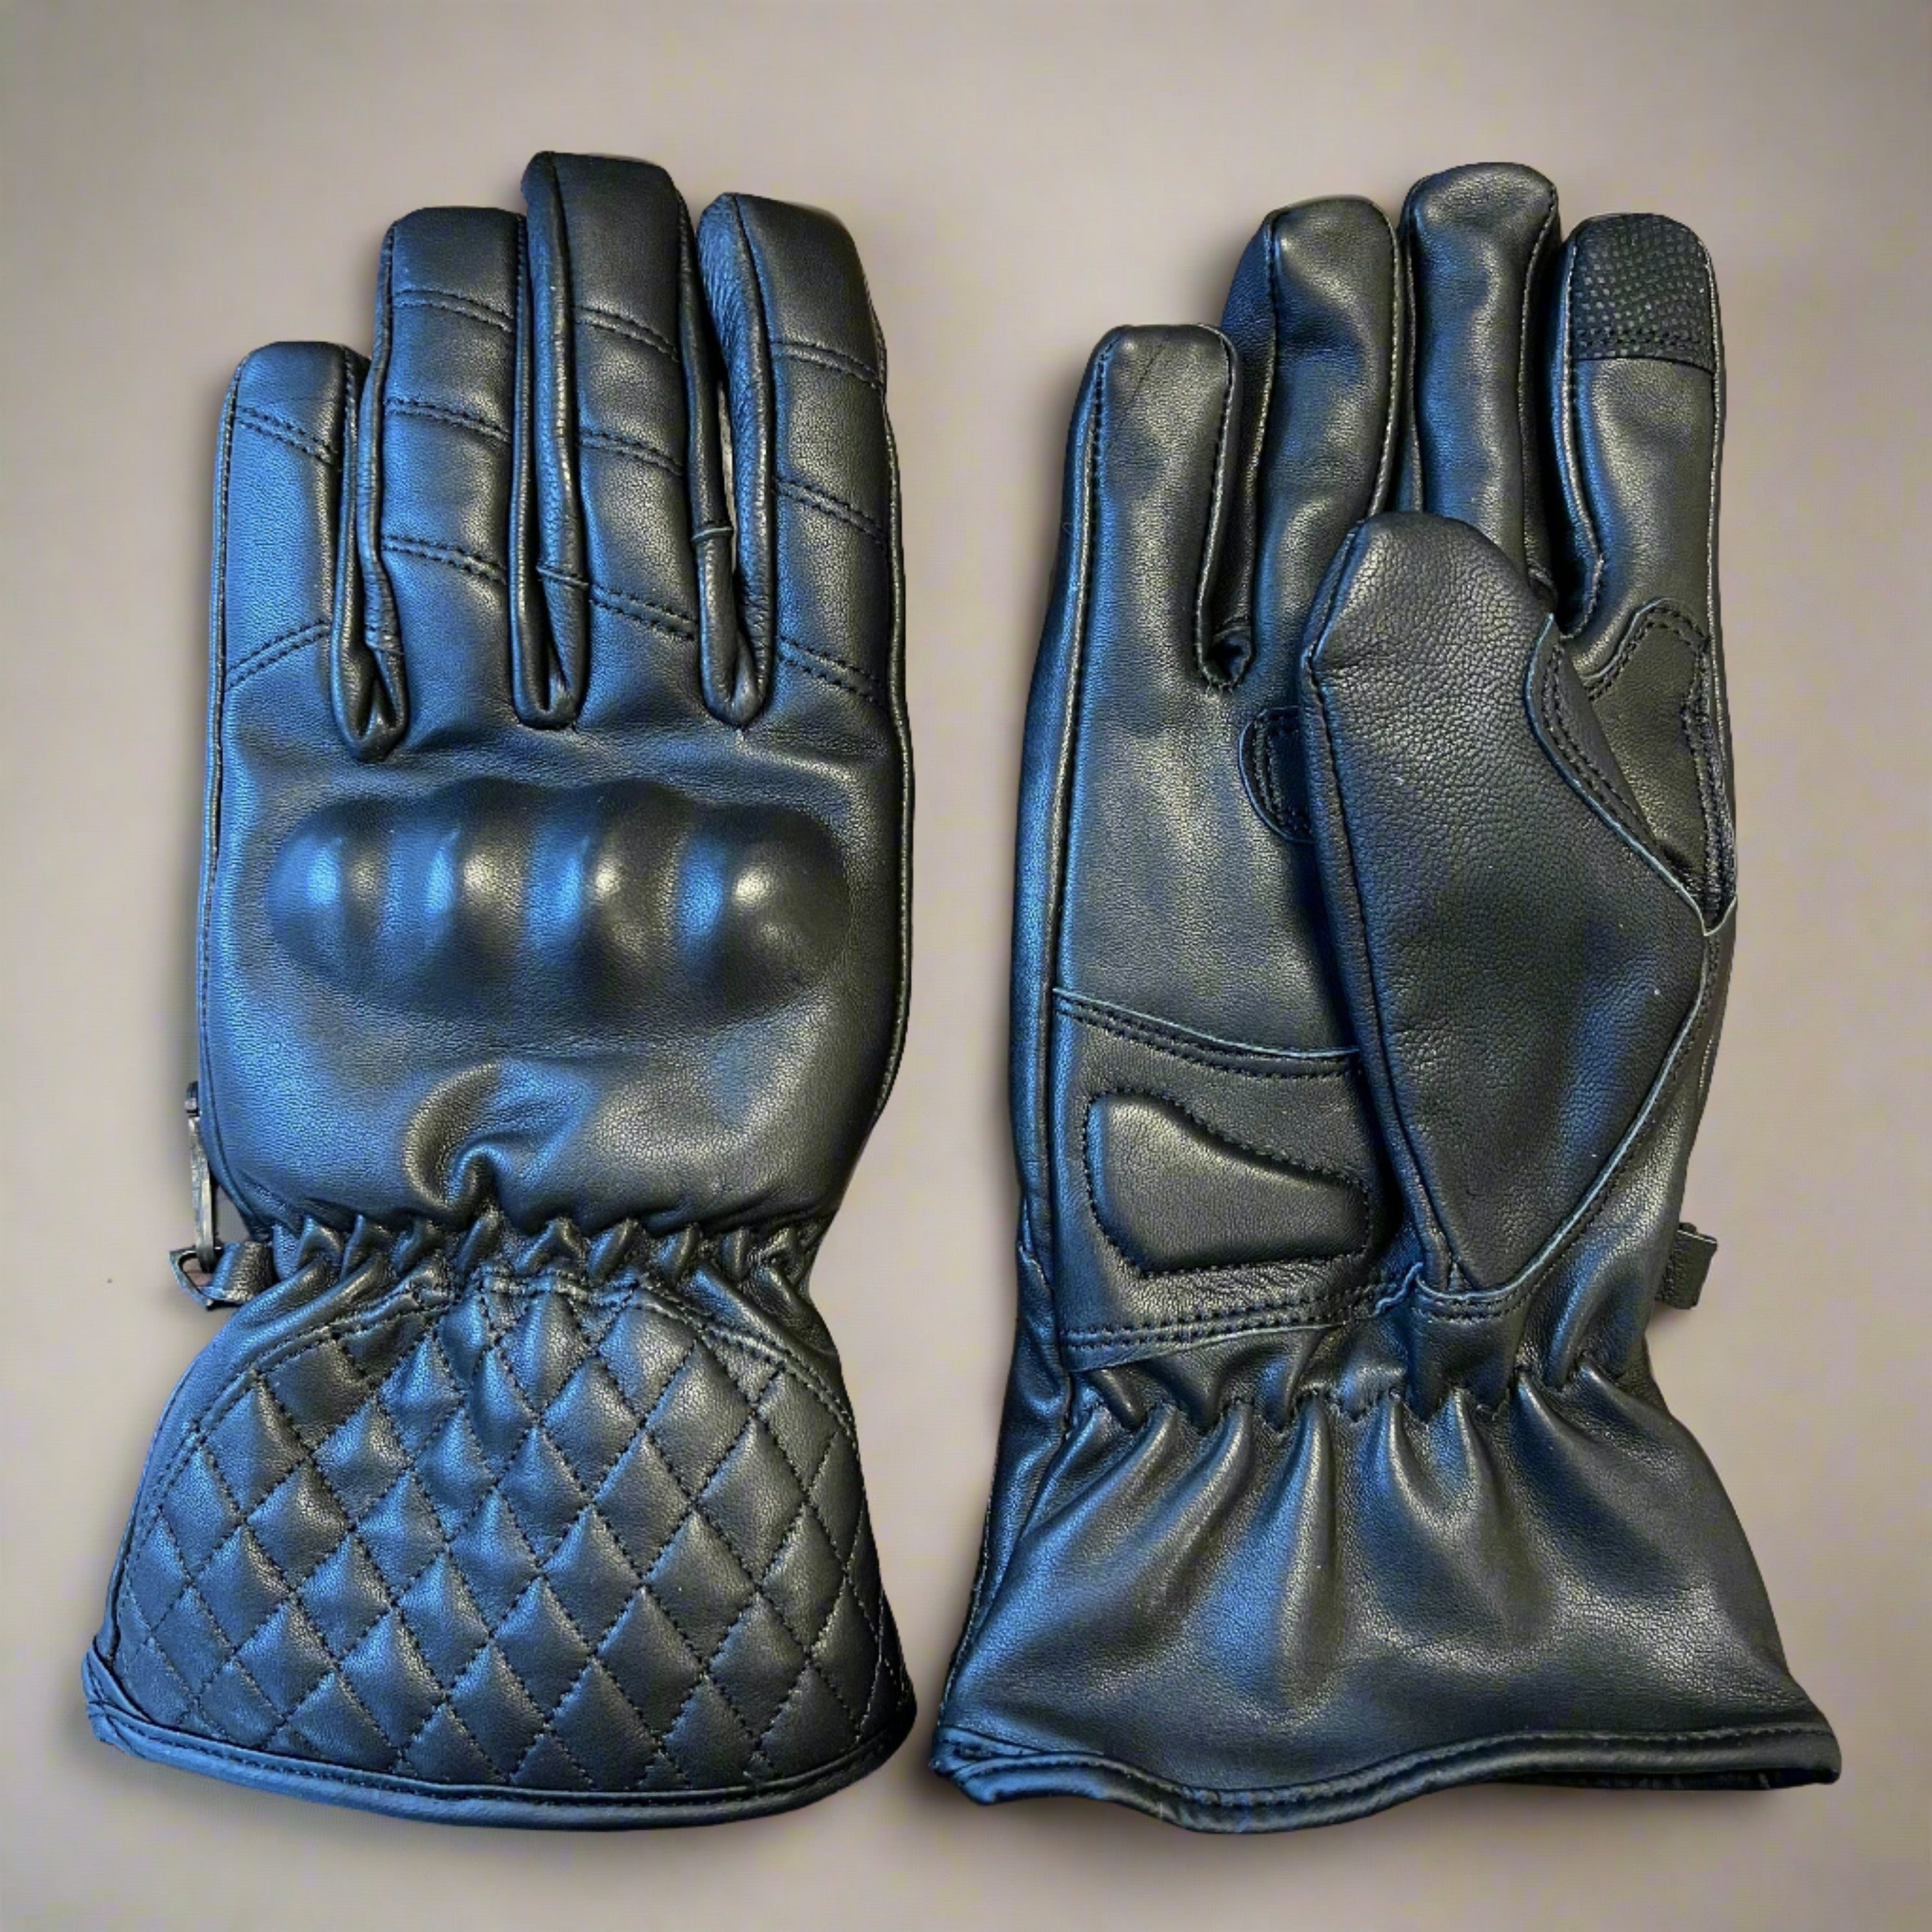 Hard Knuckle Leather Motorcycle Gloves - Boutique of Leathers/Open Road